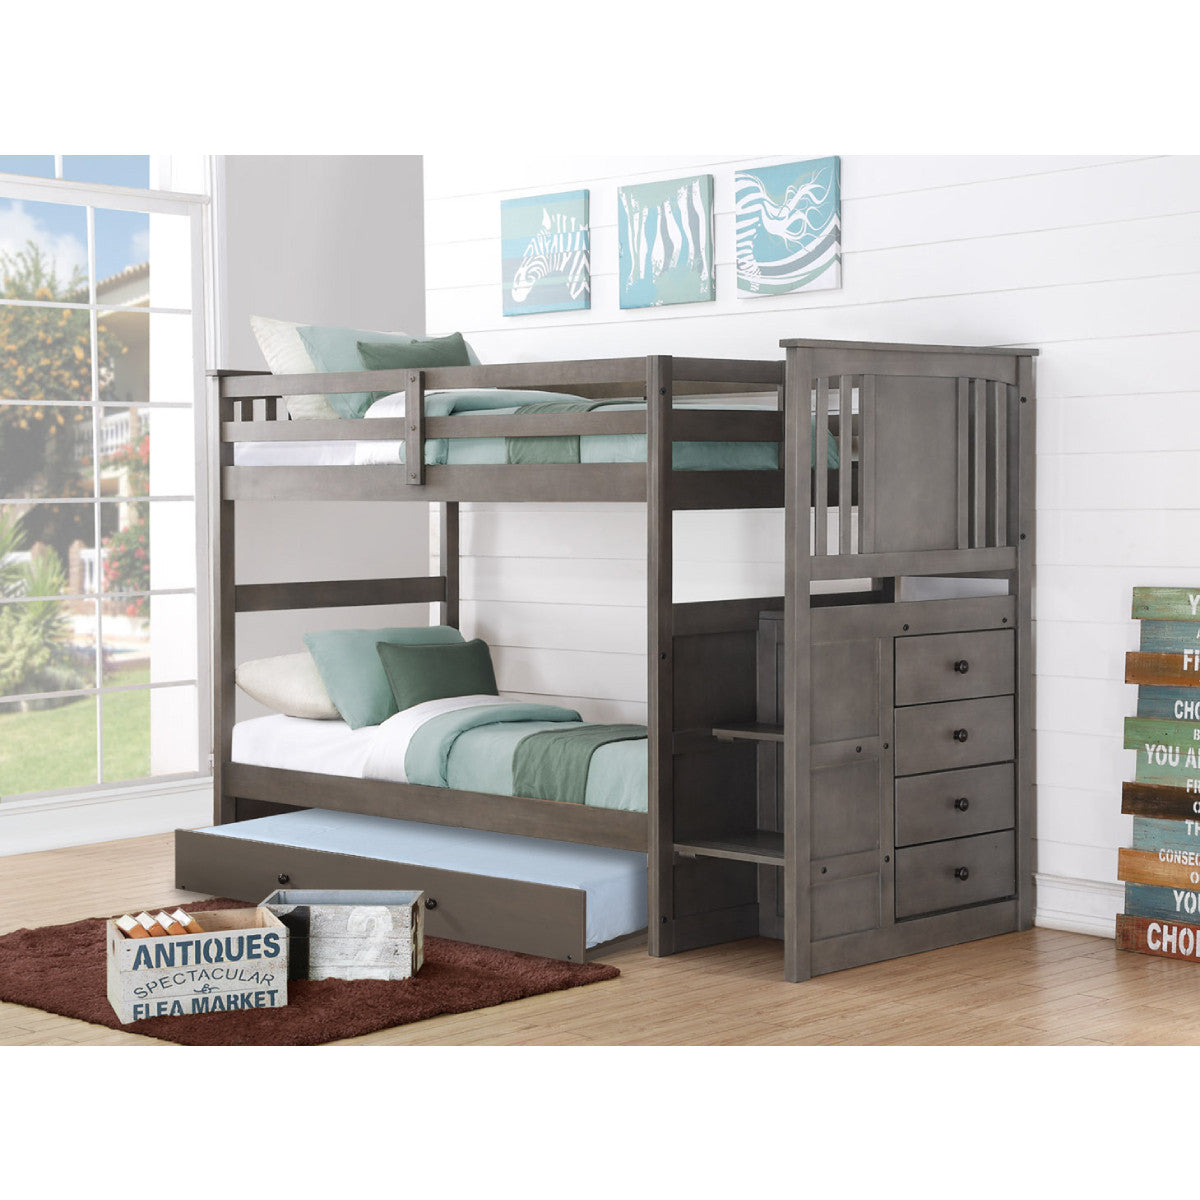 TWIN/TWIN PRINCETON STAIRWAY BUNK BED WITH TRUNDLE BED SLATE GREY FINISH